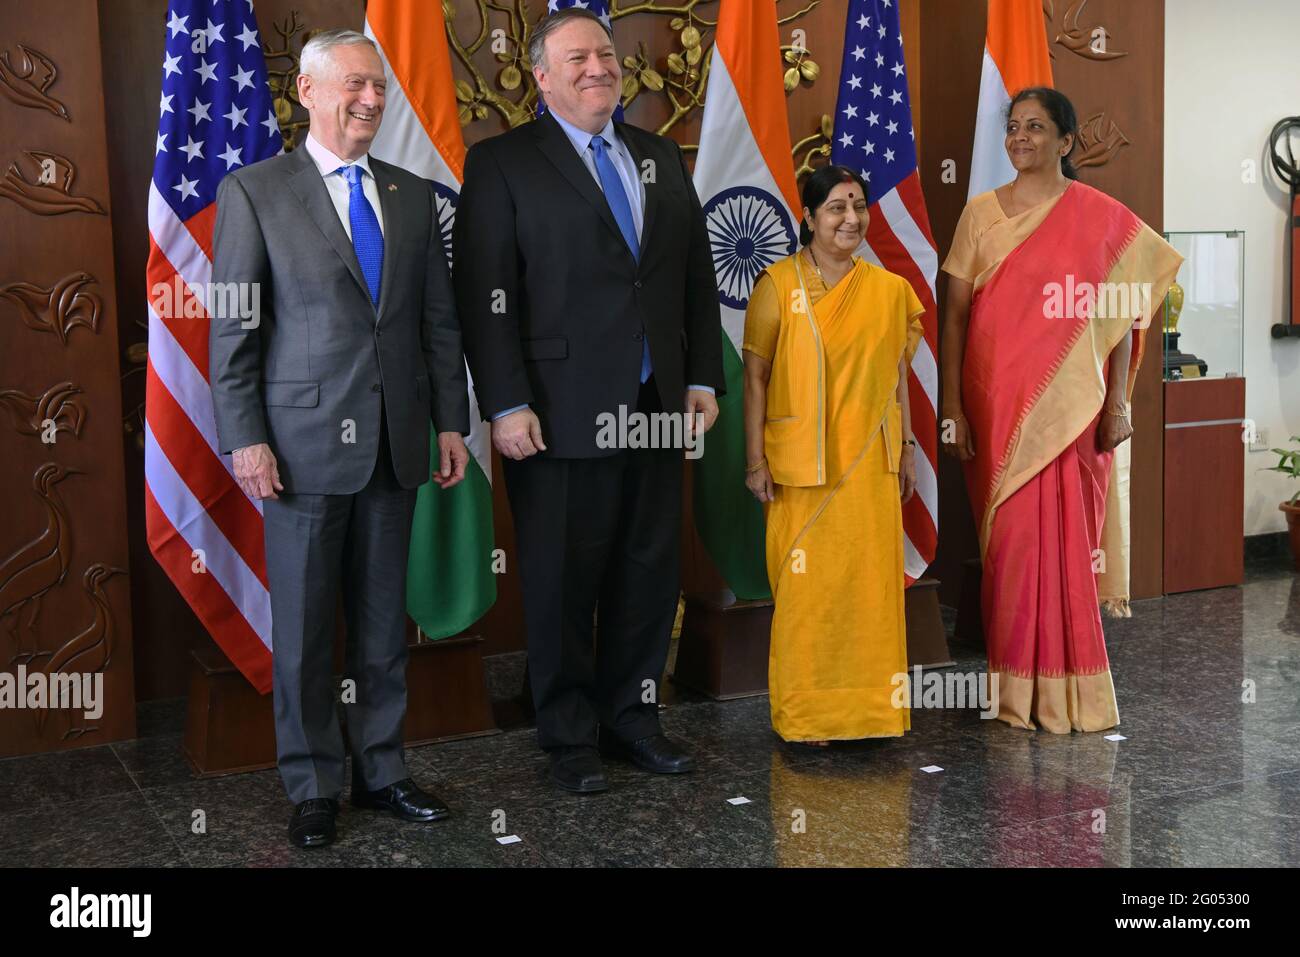 Reportage:  (from left) U.S. Secretary of Defense James N. Mattis, U.S. Secretary of State Michael Pompeo, Indian Minister of External Affairs Sushma Swaraj and Indian Defense Minister Nirmala Sitharaman pose for the cameras, at the Ministry of Foreign Affairs Jawaharlal Nehru Bhawan, New Delhi, India, Sept. 6, 2018. Mattis and Pompeo met with their Indian counterparts for the first-ever U.S.-India ministerial dialogue to re-affirm their commitment to an enhanced partnership. Stock Photo